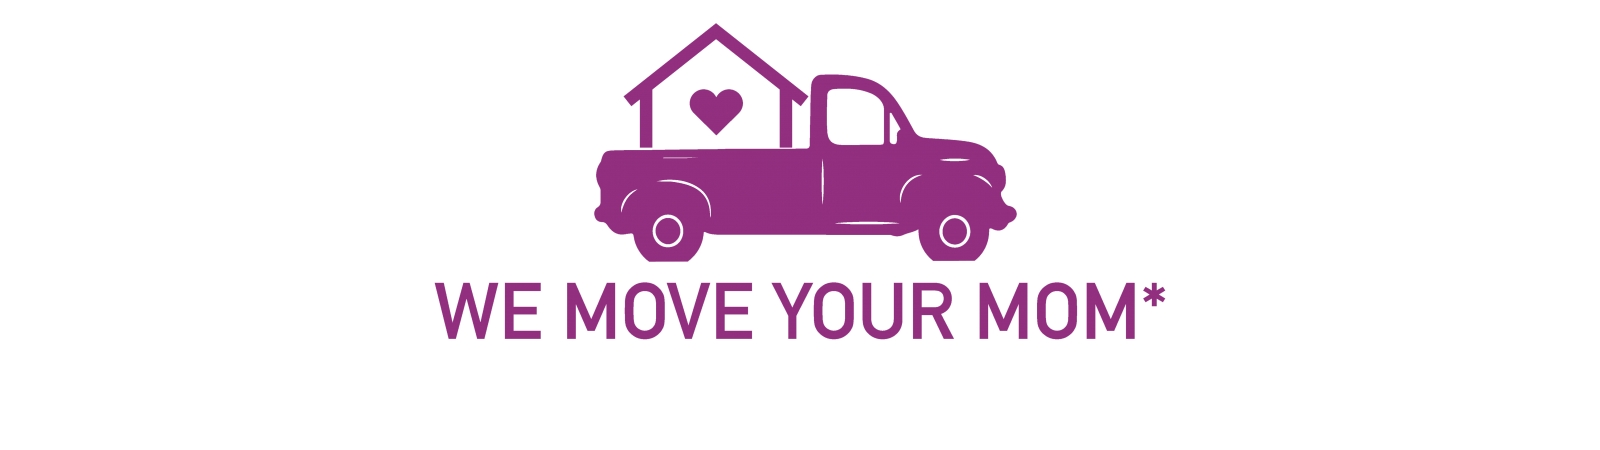 We Move Your Mom | AuctionNinja